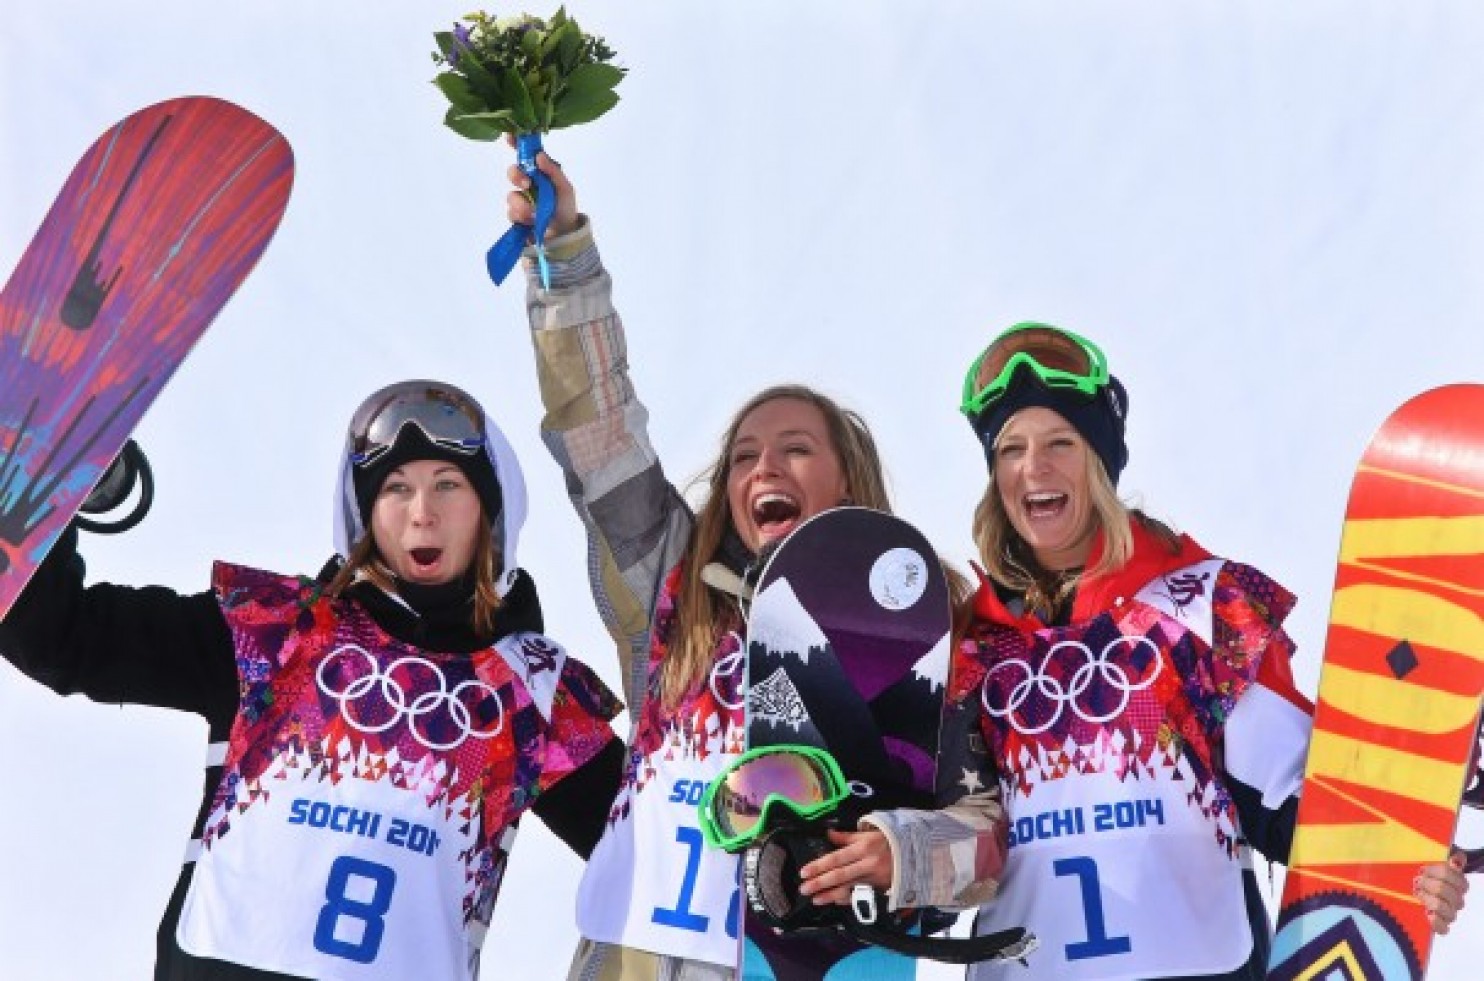 epa04063839 Winner Jamie Anderson of the USA is flanked by second placed Enni Rukajarvi (L) of Finland and third placed Jenny Jones of Great Britain during the flower ceremony for the Women's Snowboard Slopestyle at Rosa Khutor Extreme Park at the Sochi 2014 Olympic Games, Krasnaya Polyana, Russia, 09 February 2014. EPA/JENS BUETTNER